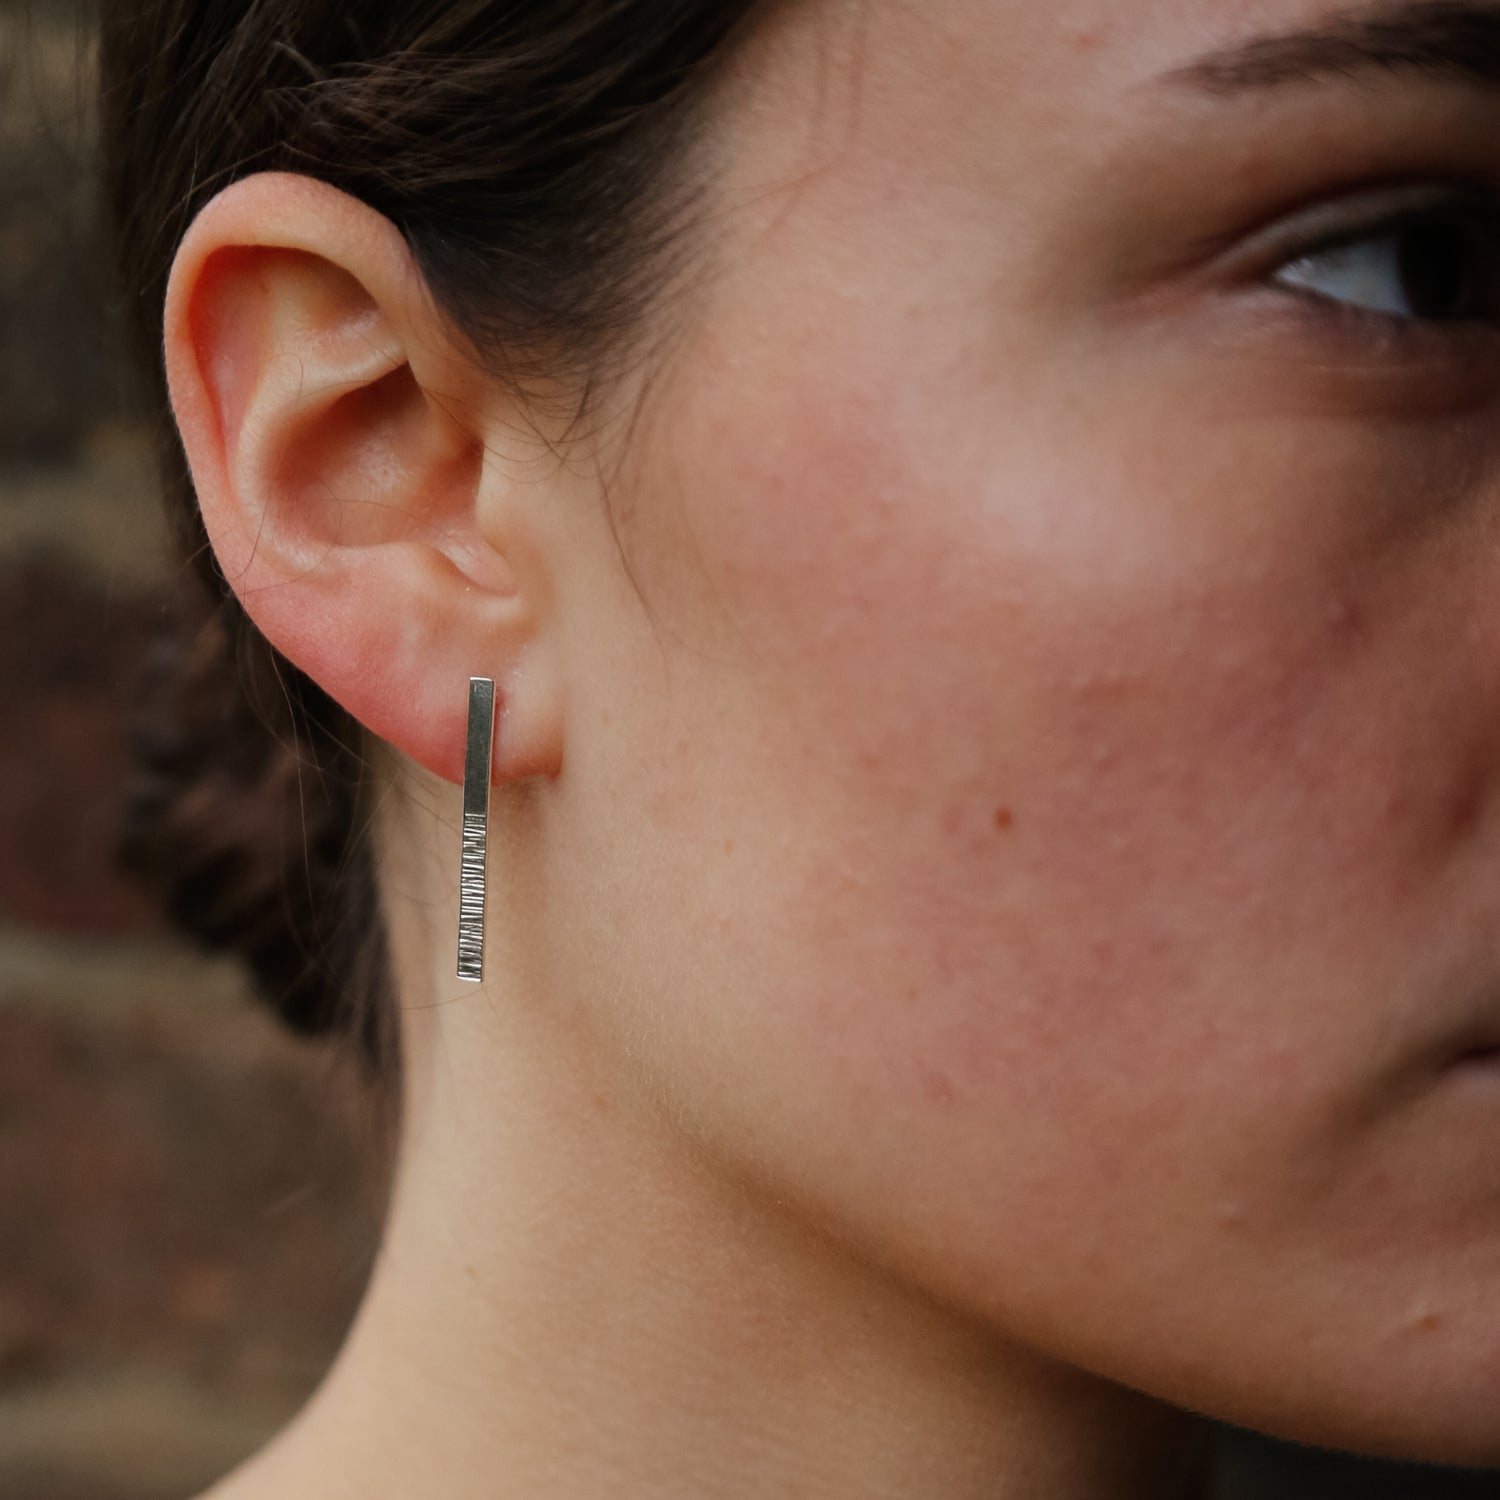 Silver Oblong Stud Earrings. Photo credit Iona Hall